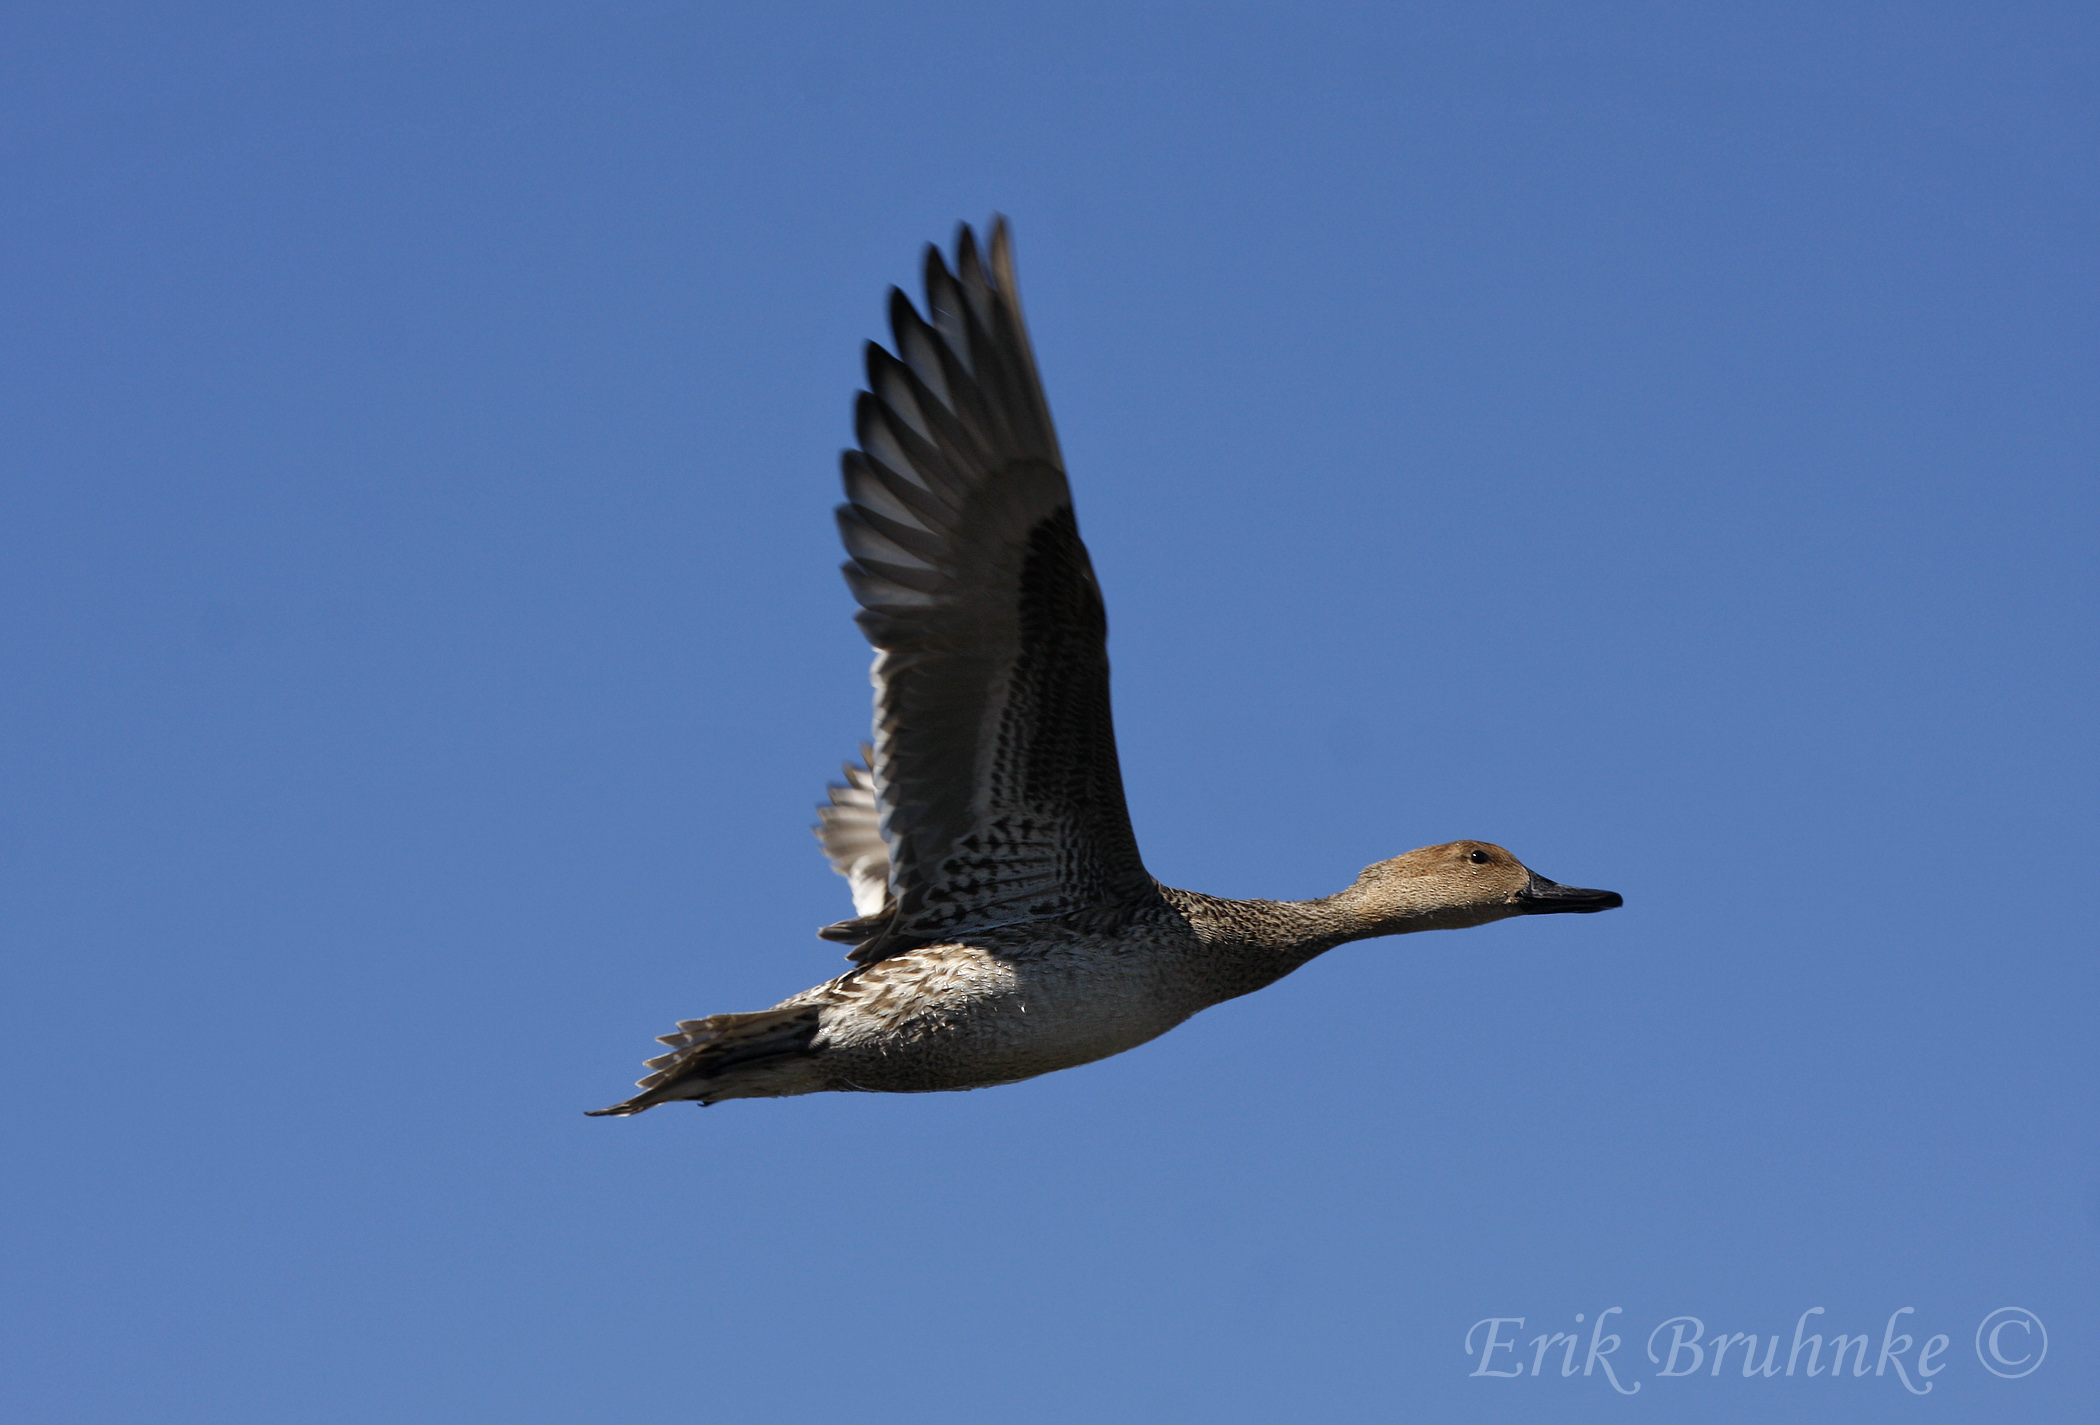 Female Northern Pintail in flight